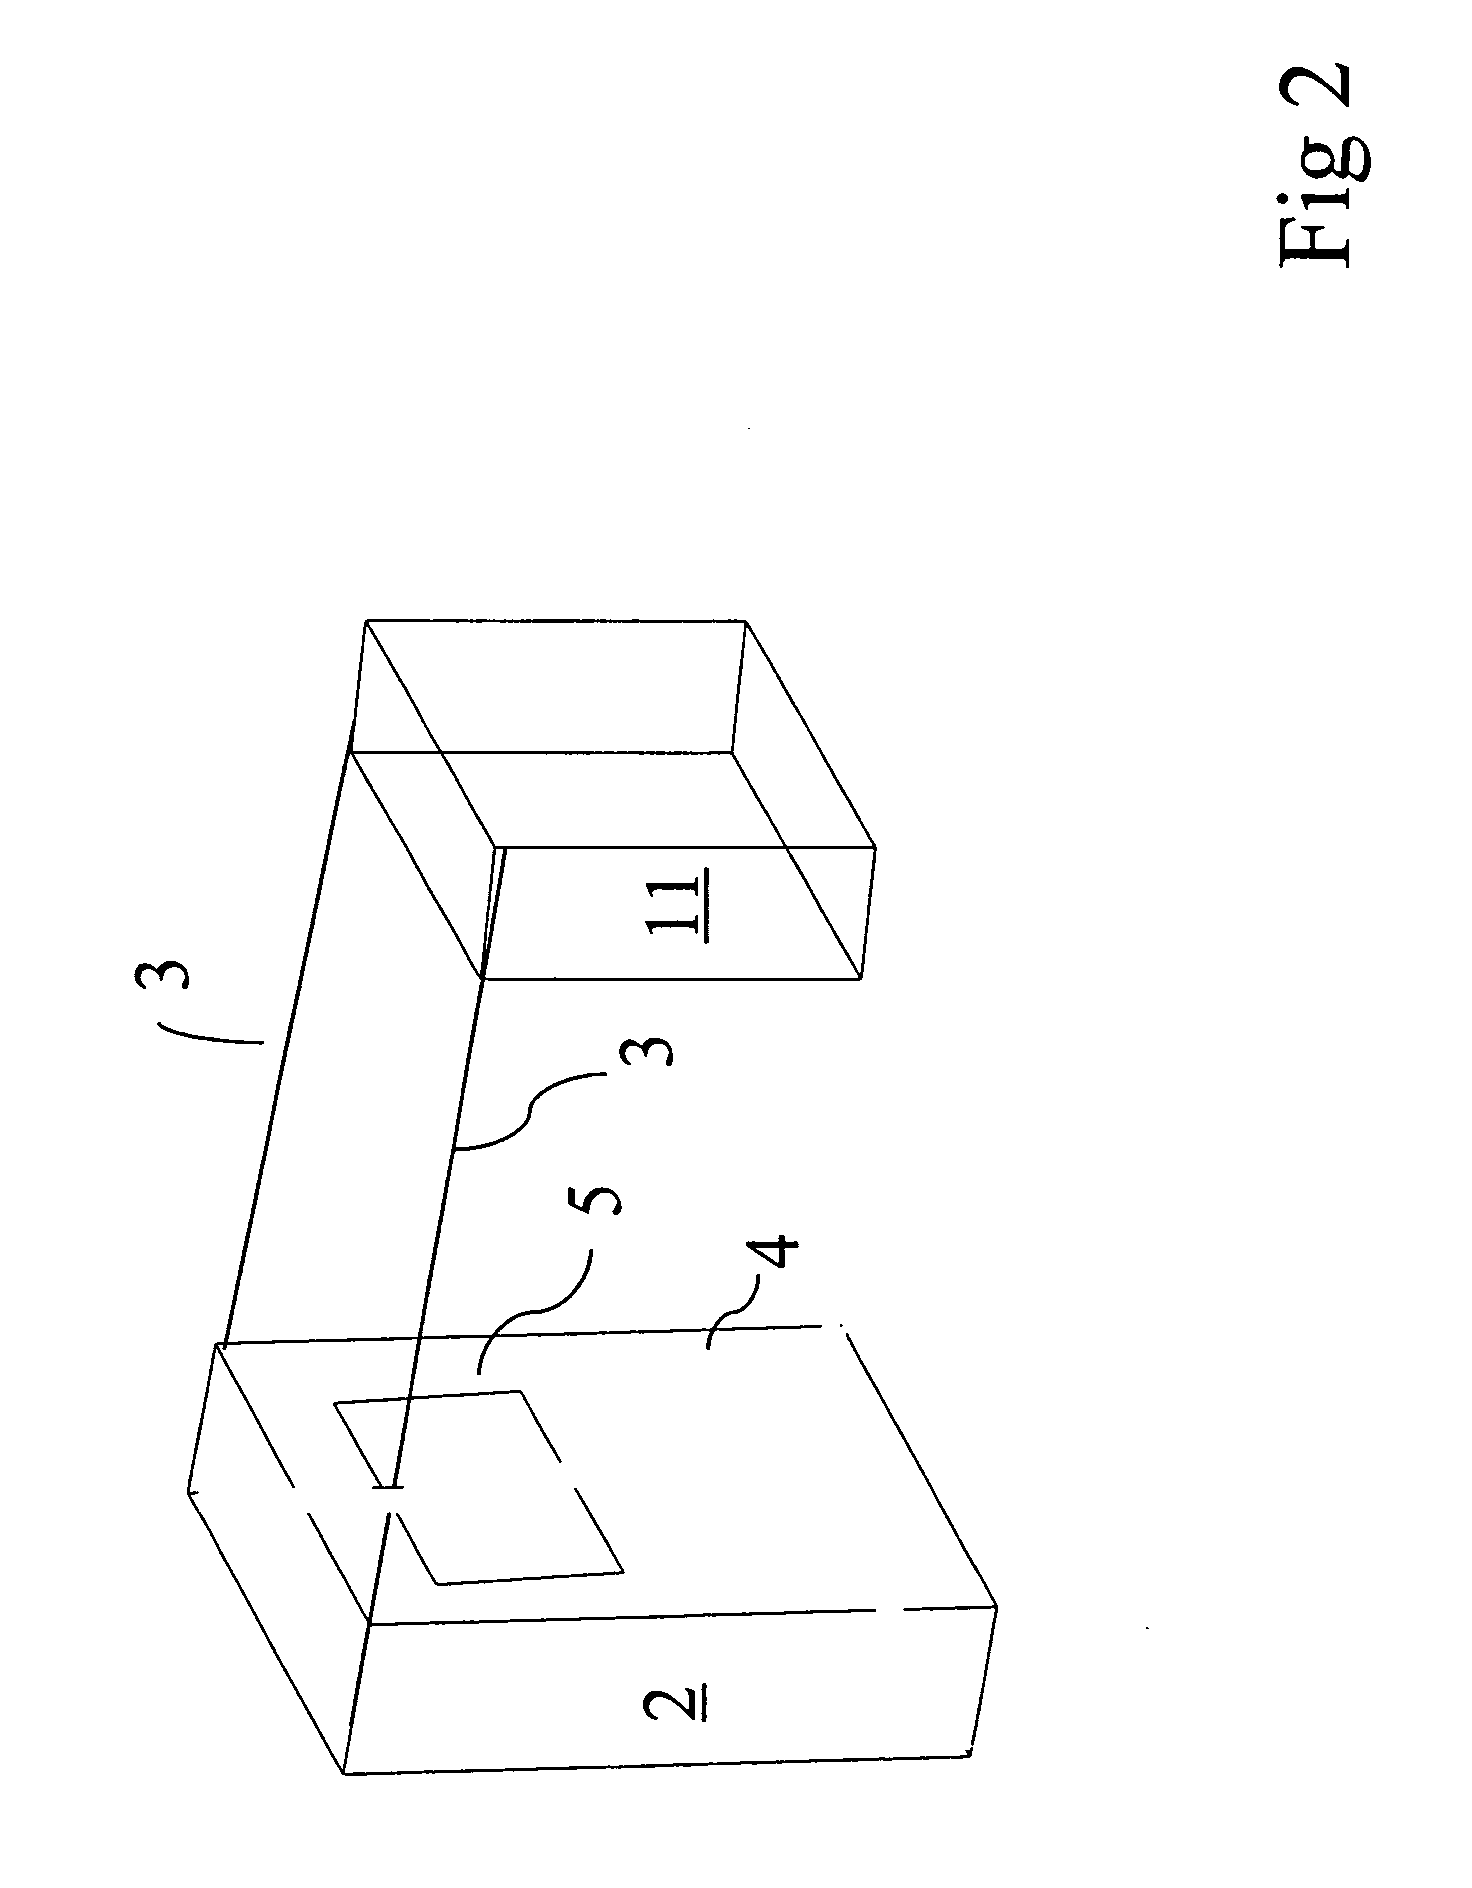 Utility monitoring system and method for relaying personalized real-time utility consumption information to a consumer